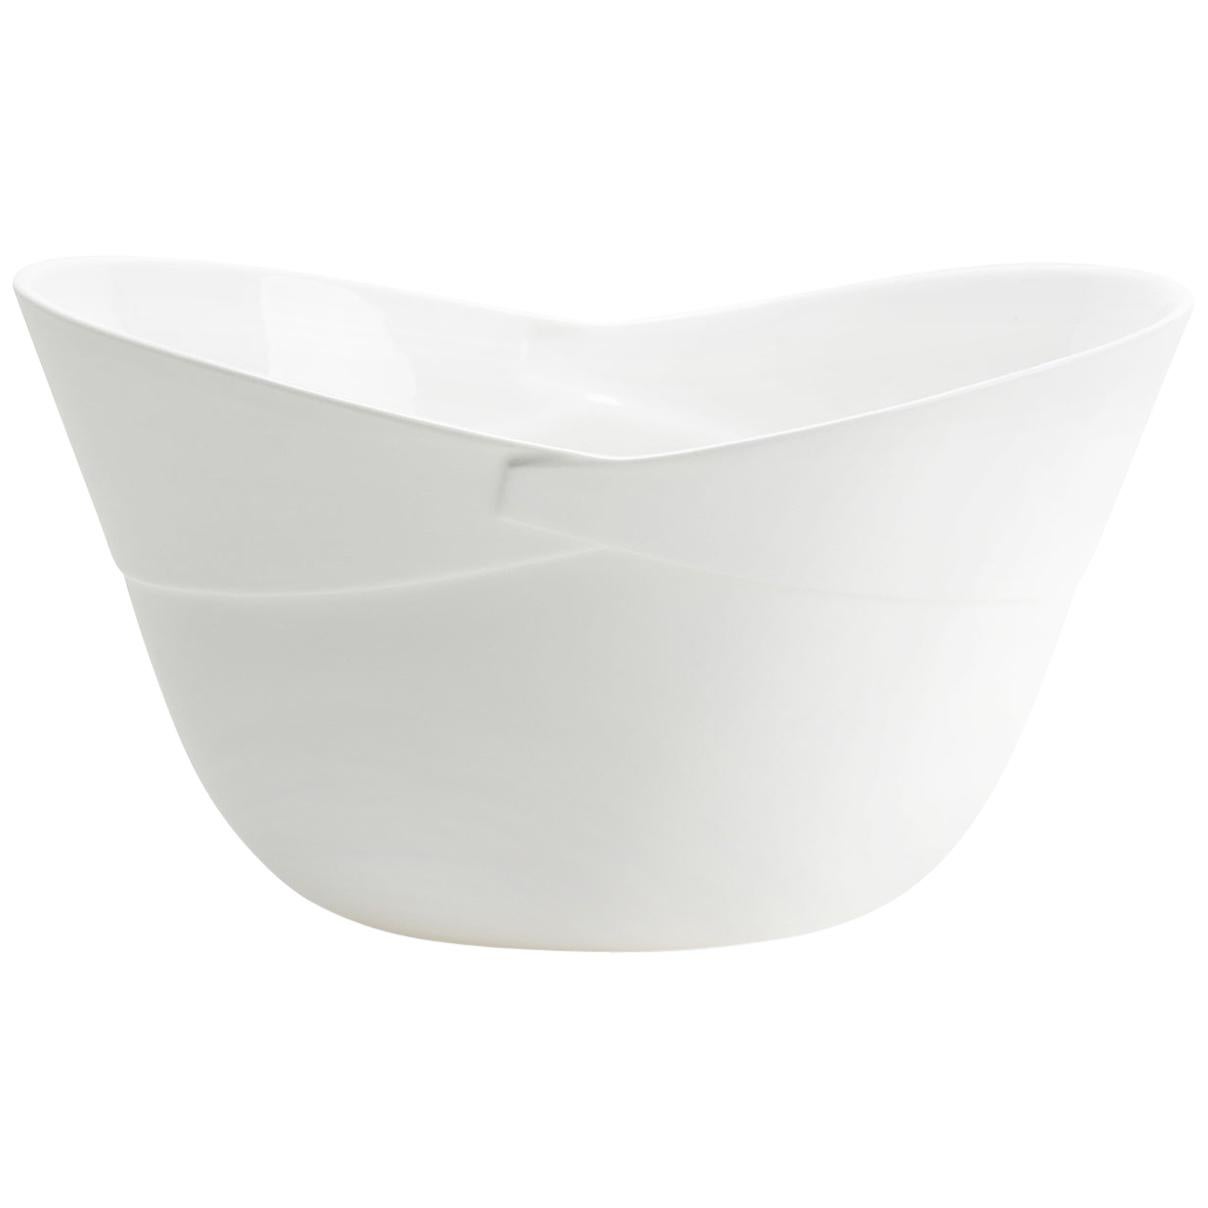 Fine Bone China Large Deep Bowl Sculpted with Generous and Curvaceous Forms For Sale